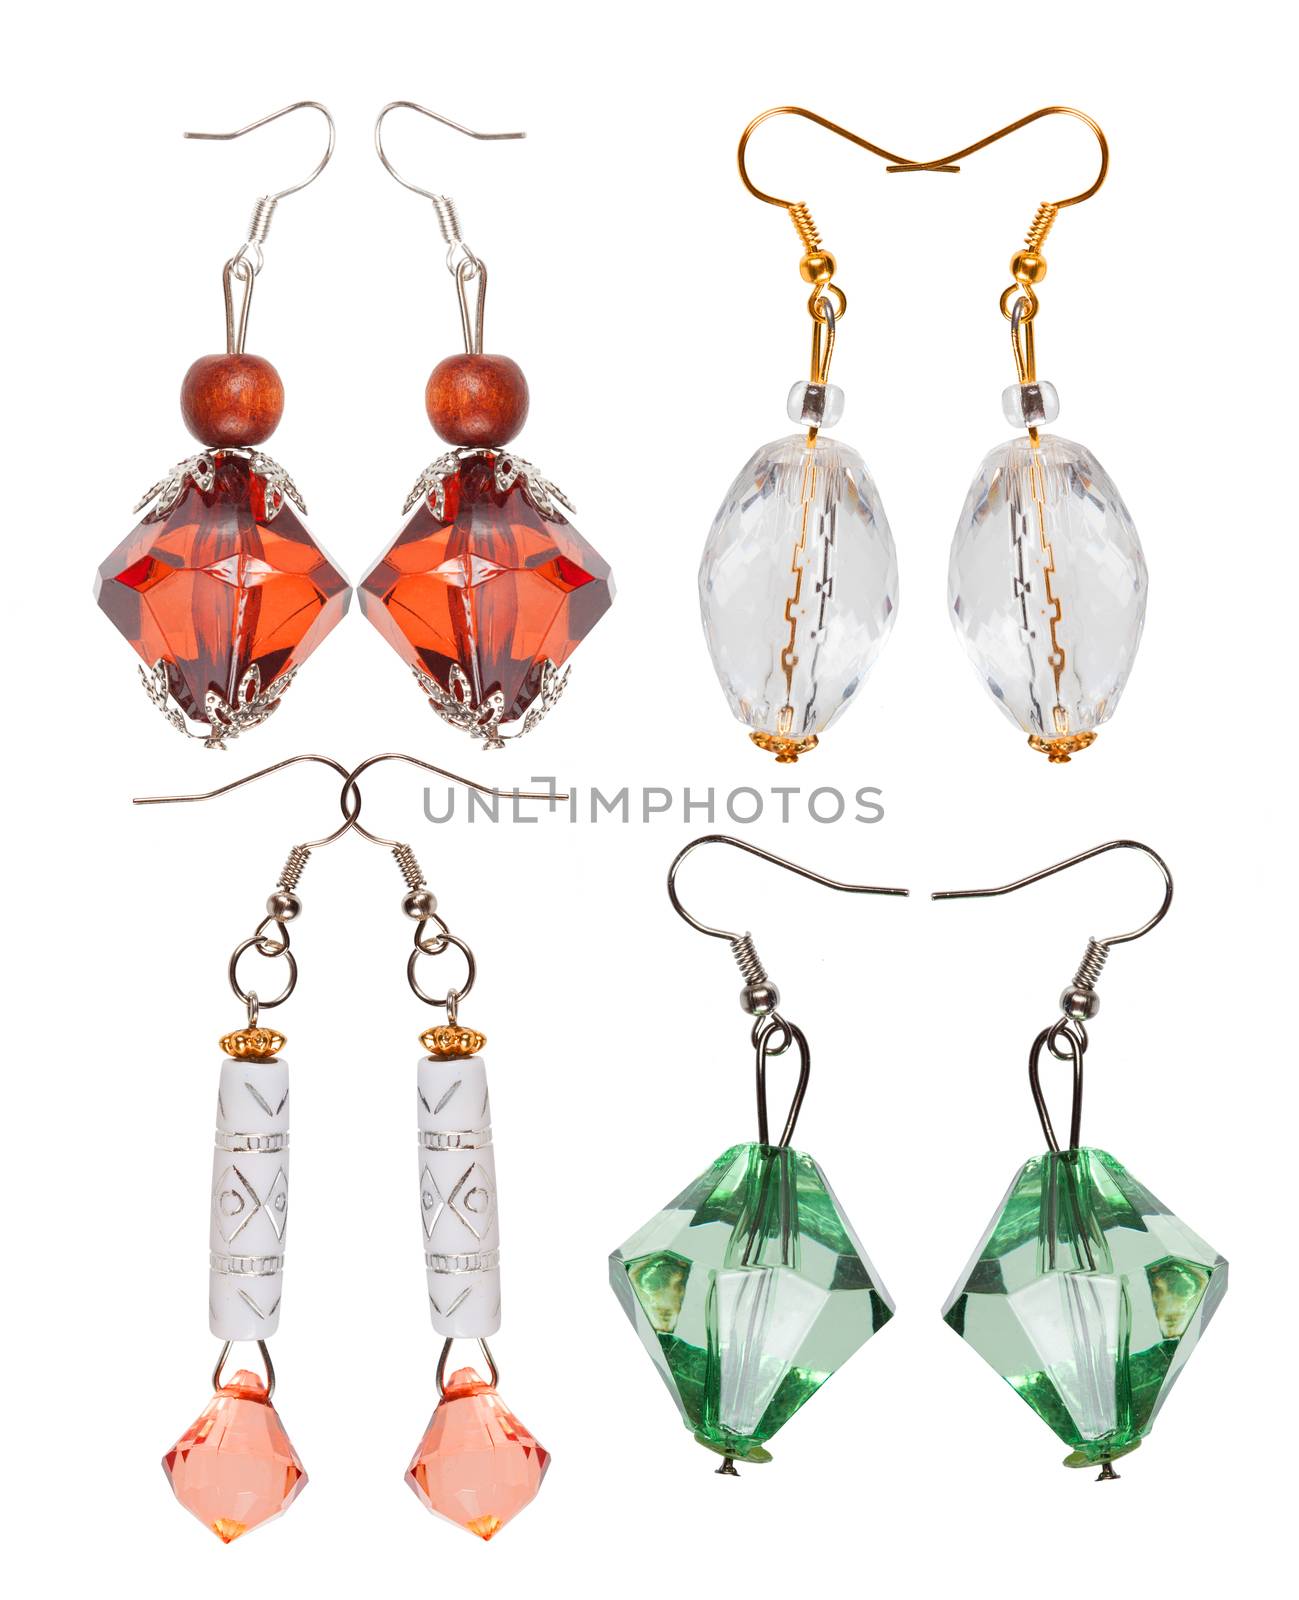 Earrings made of plastic and glass on a white background. Four p by AleksandrN